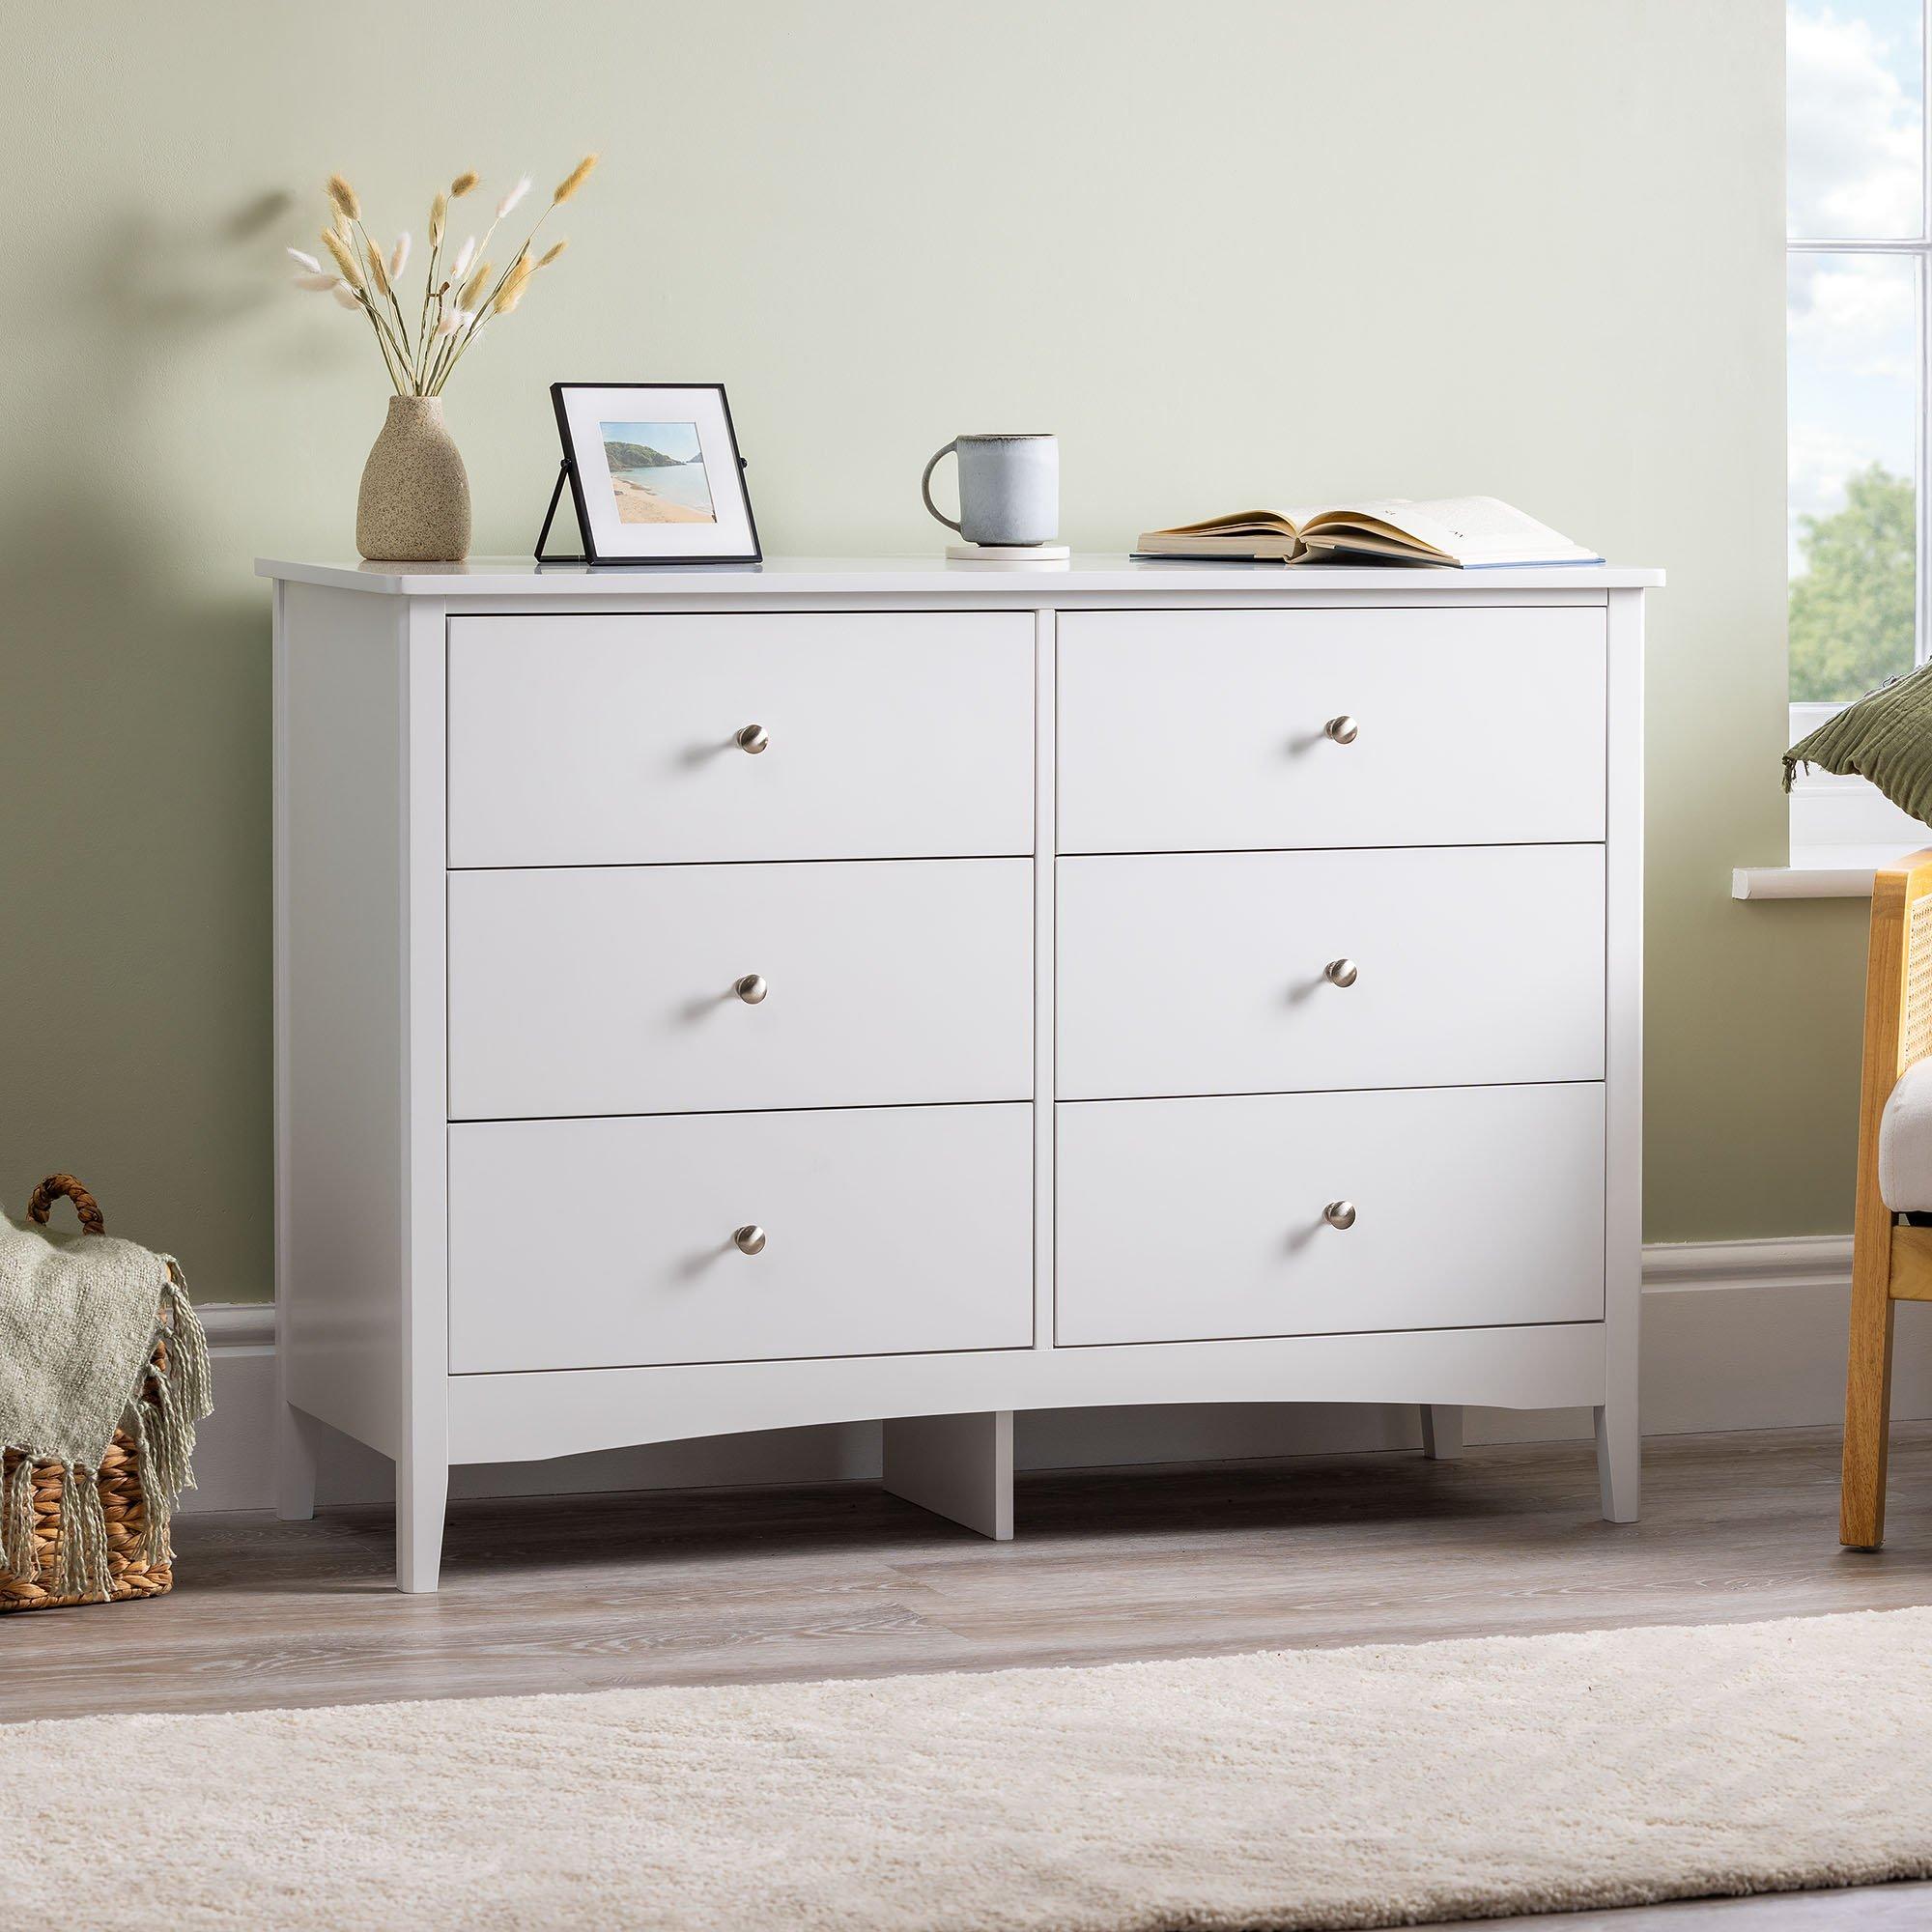 White Chest of Drawers Modern 6 Drawer Bedroom Storage Unit Furniture Cabinet